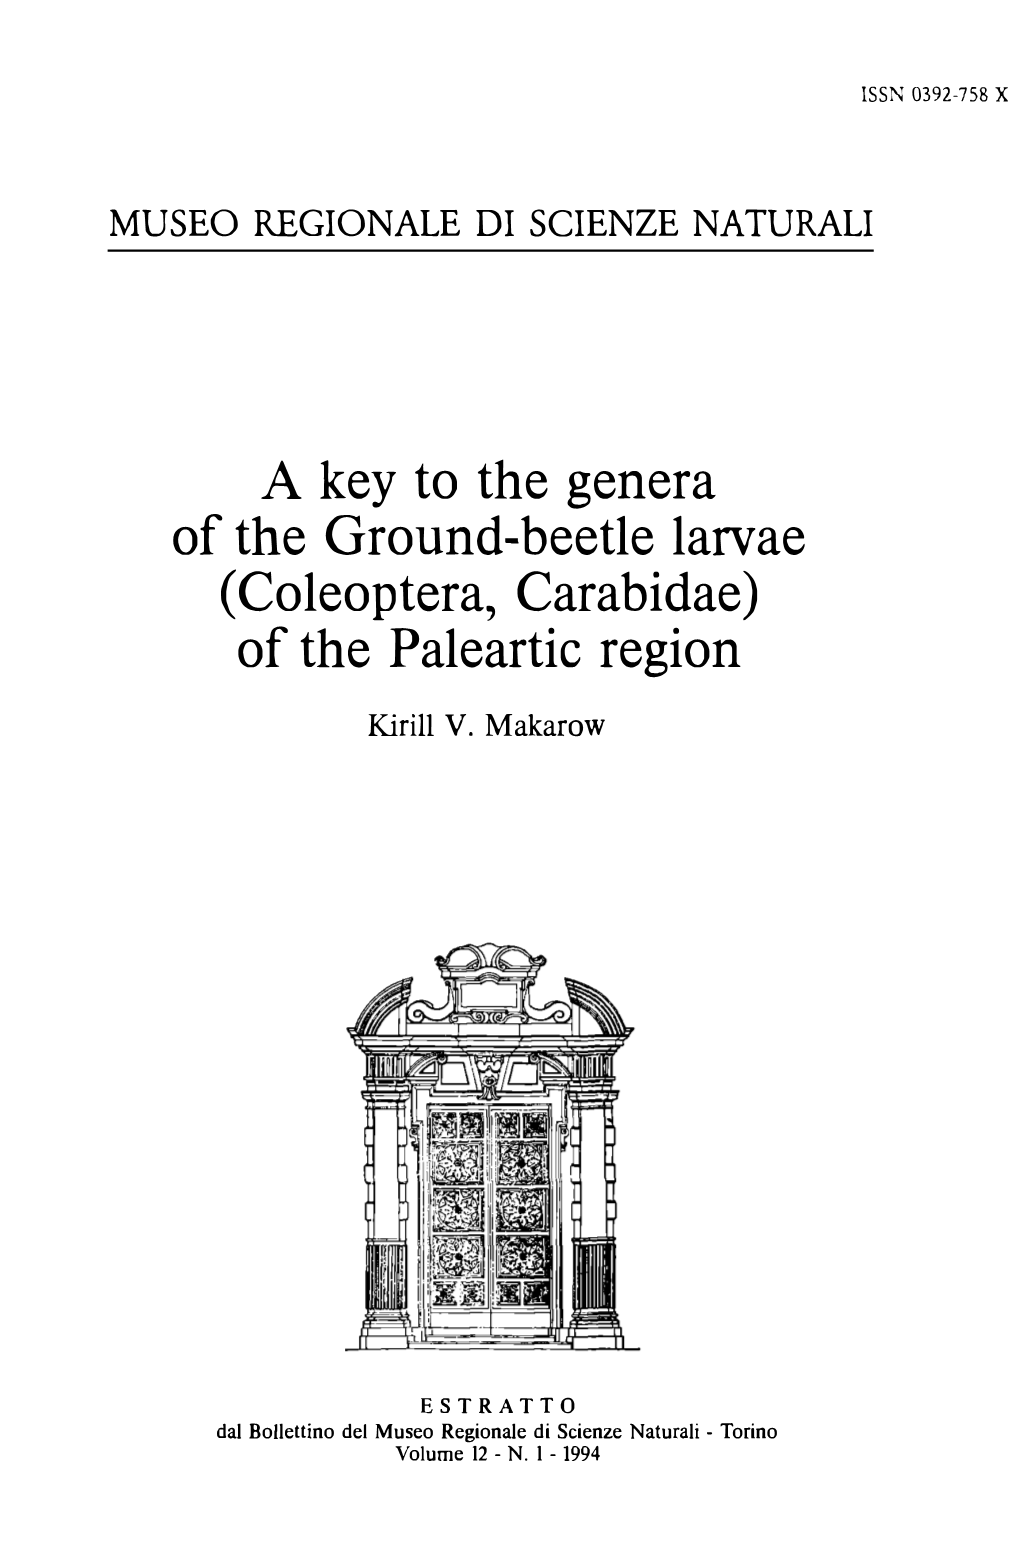 A Key to the Genera of the Ground-Beetle Larvae (Coleoptera, Carabidae) of the Paleartic Region